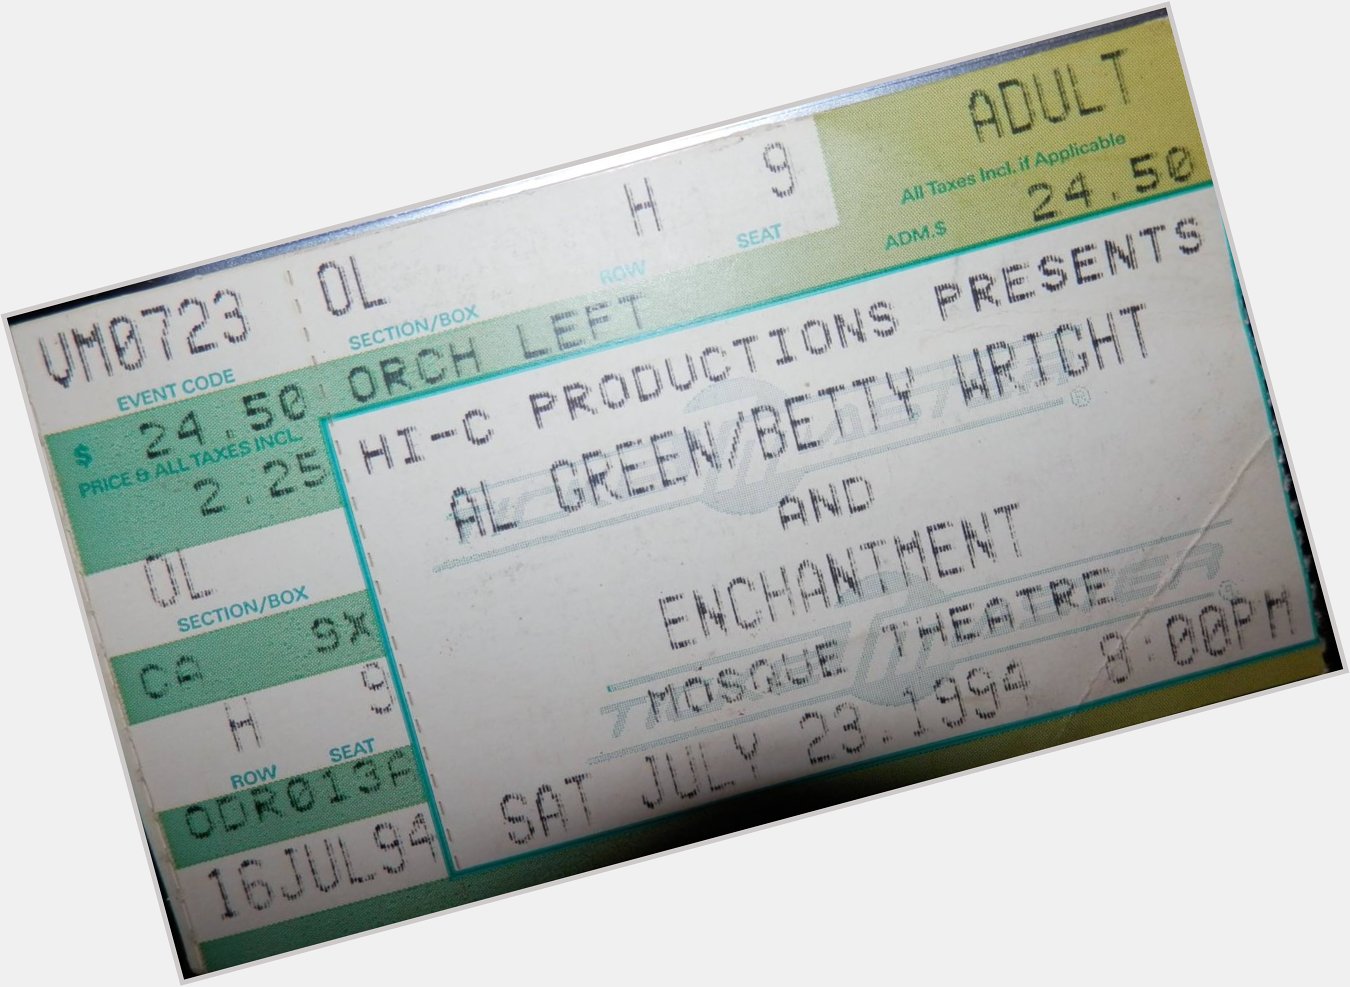 Happy birthday, Al Green! I remember this concert like it was yesterday. 